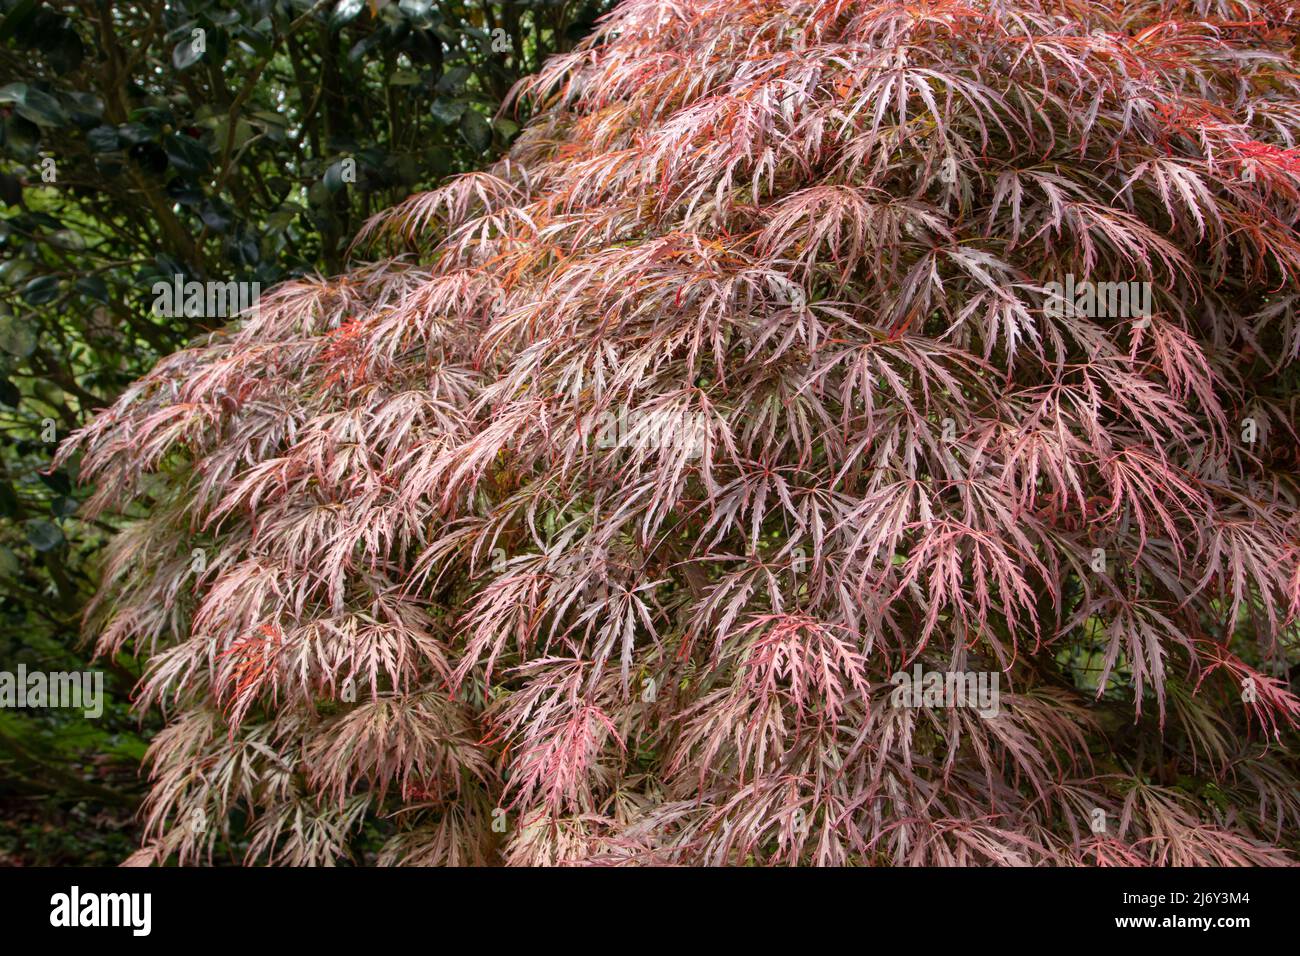 Acer palmatum dissectum atropurpureum,Japanese maple,palmate maple or smooth Japanese maple decorative tree branches with red leaves in the spring Stock Photo